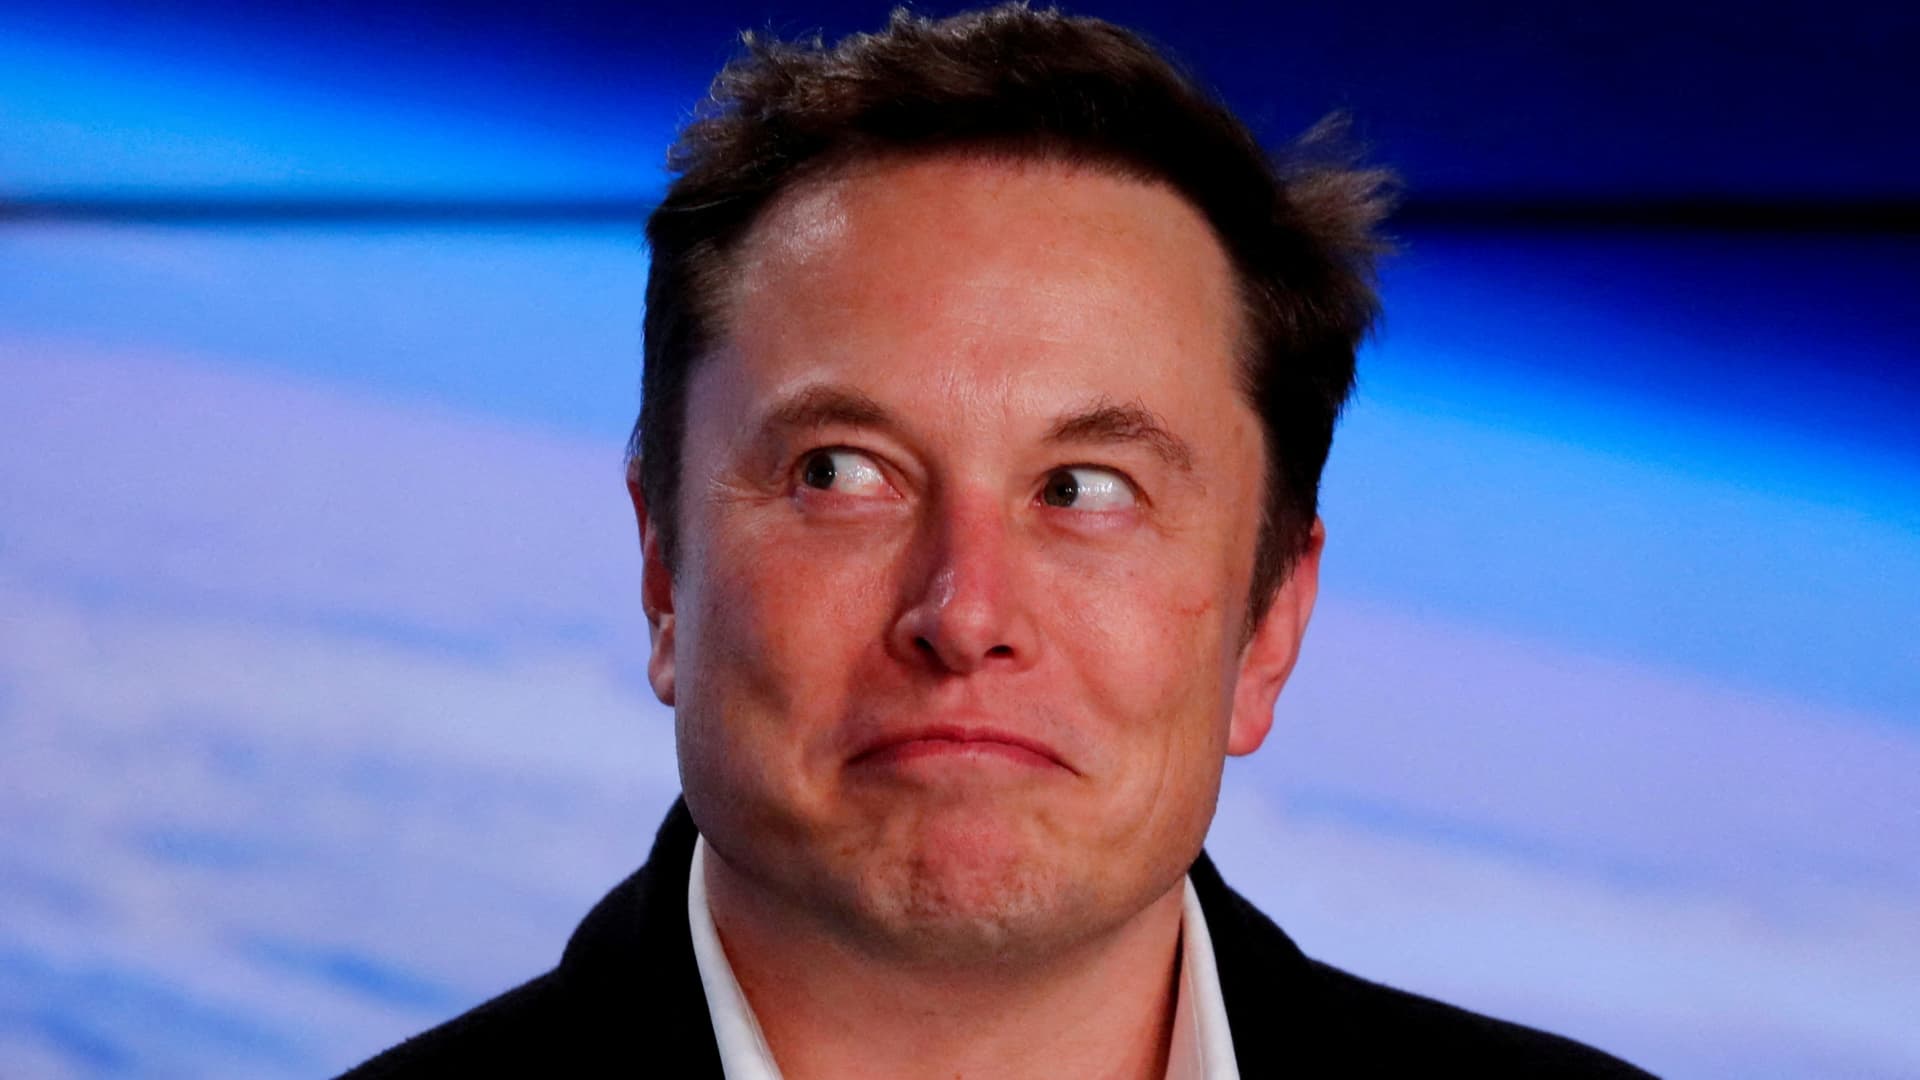 SpaceX founder Elon Musk reacts at a post-launch news conference after the SpaceX Falcon 9 rocket, carrying the Crew Dragon spacecraft, lifted off on an uncrewed test flight to the International Space Station from the Kennedy Space Center in Cape Canaveral, Florida, U.S., March 2, 2019. 